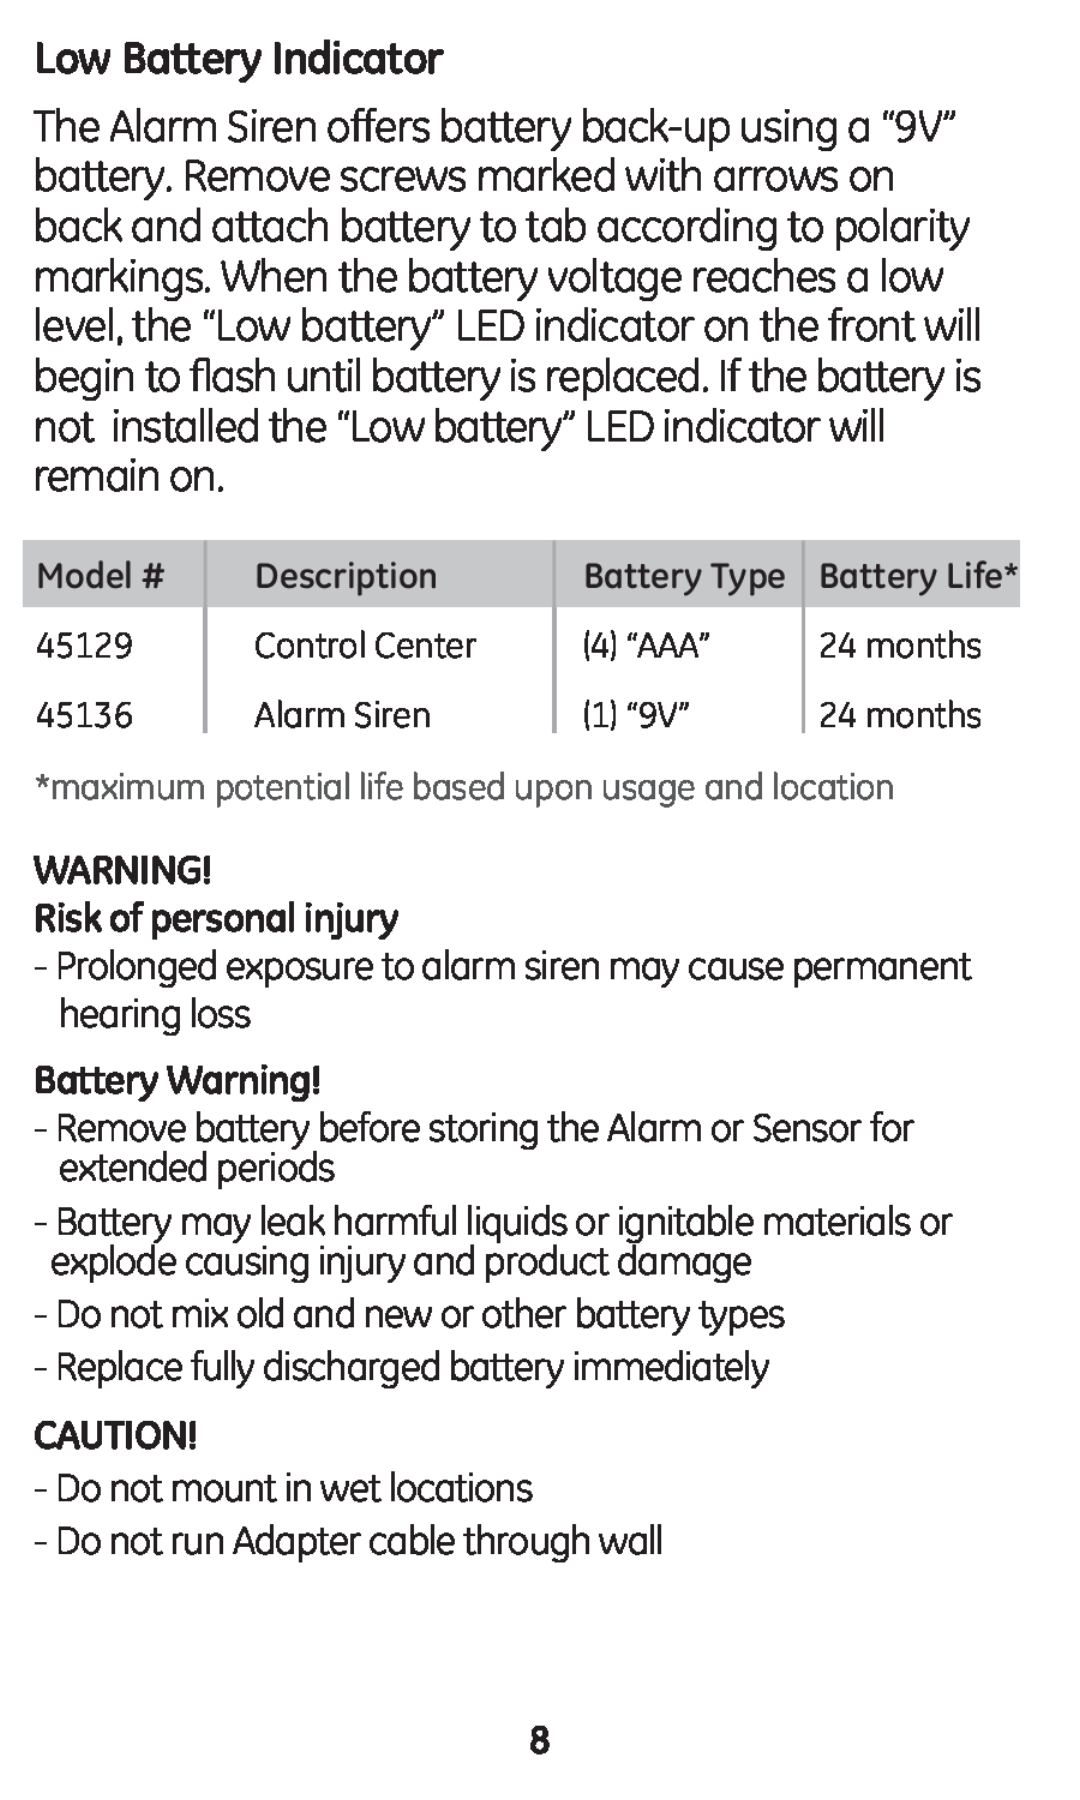 GE 45136 user manual Low Battery Indicator, Risk of personal injury, Battery Warning 